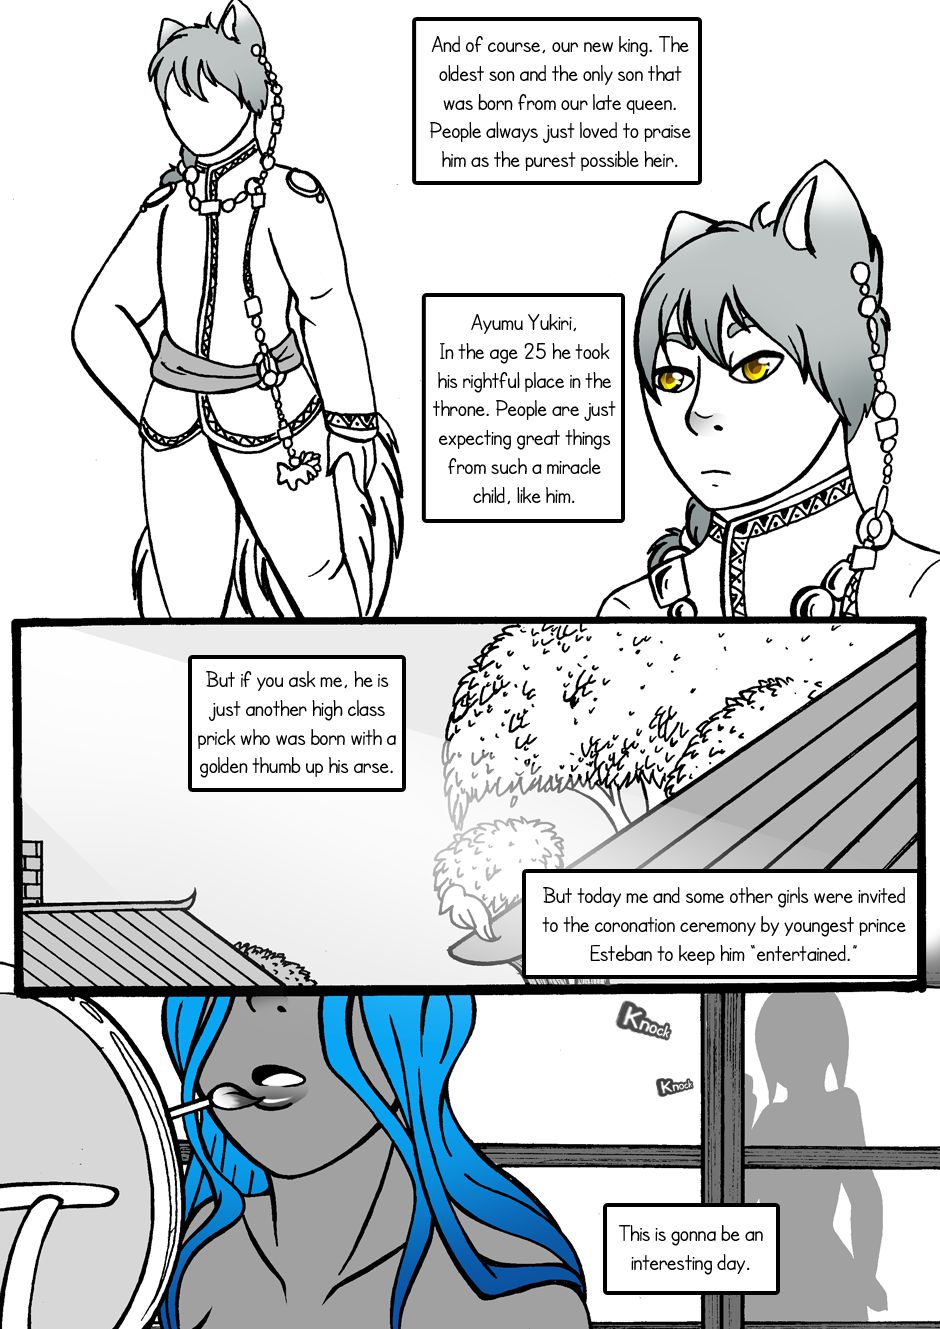 [Jeny-jen94] Between Kings and Queens [Ongoing] 18